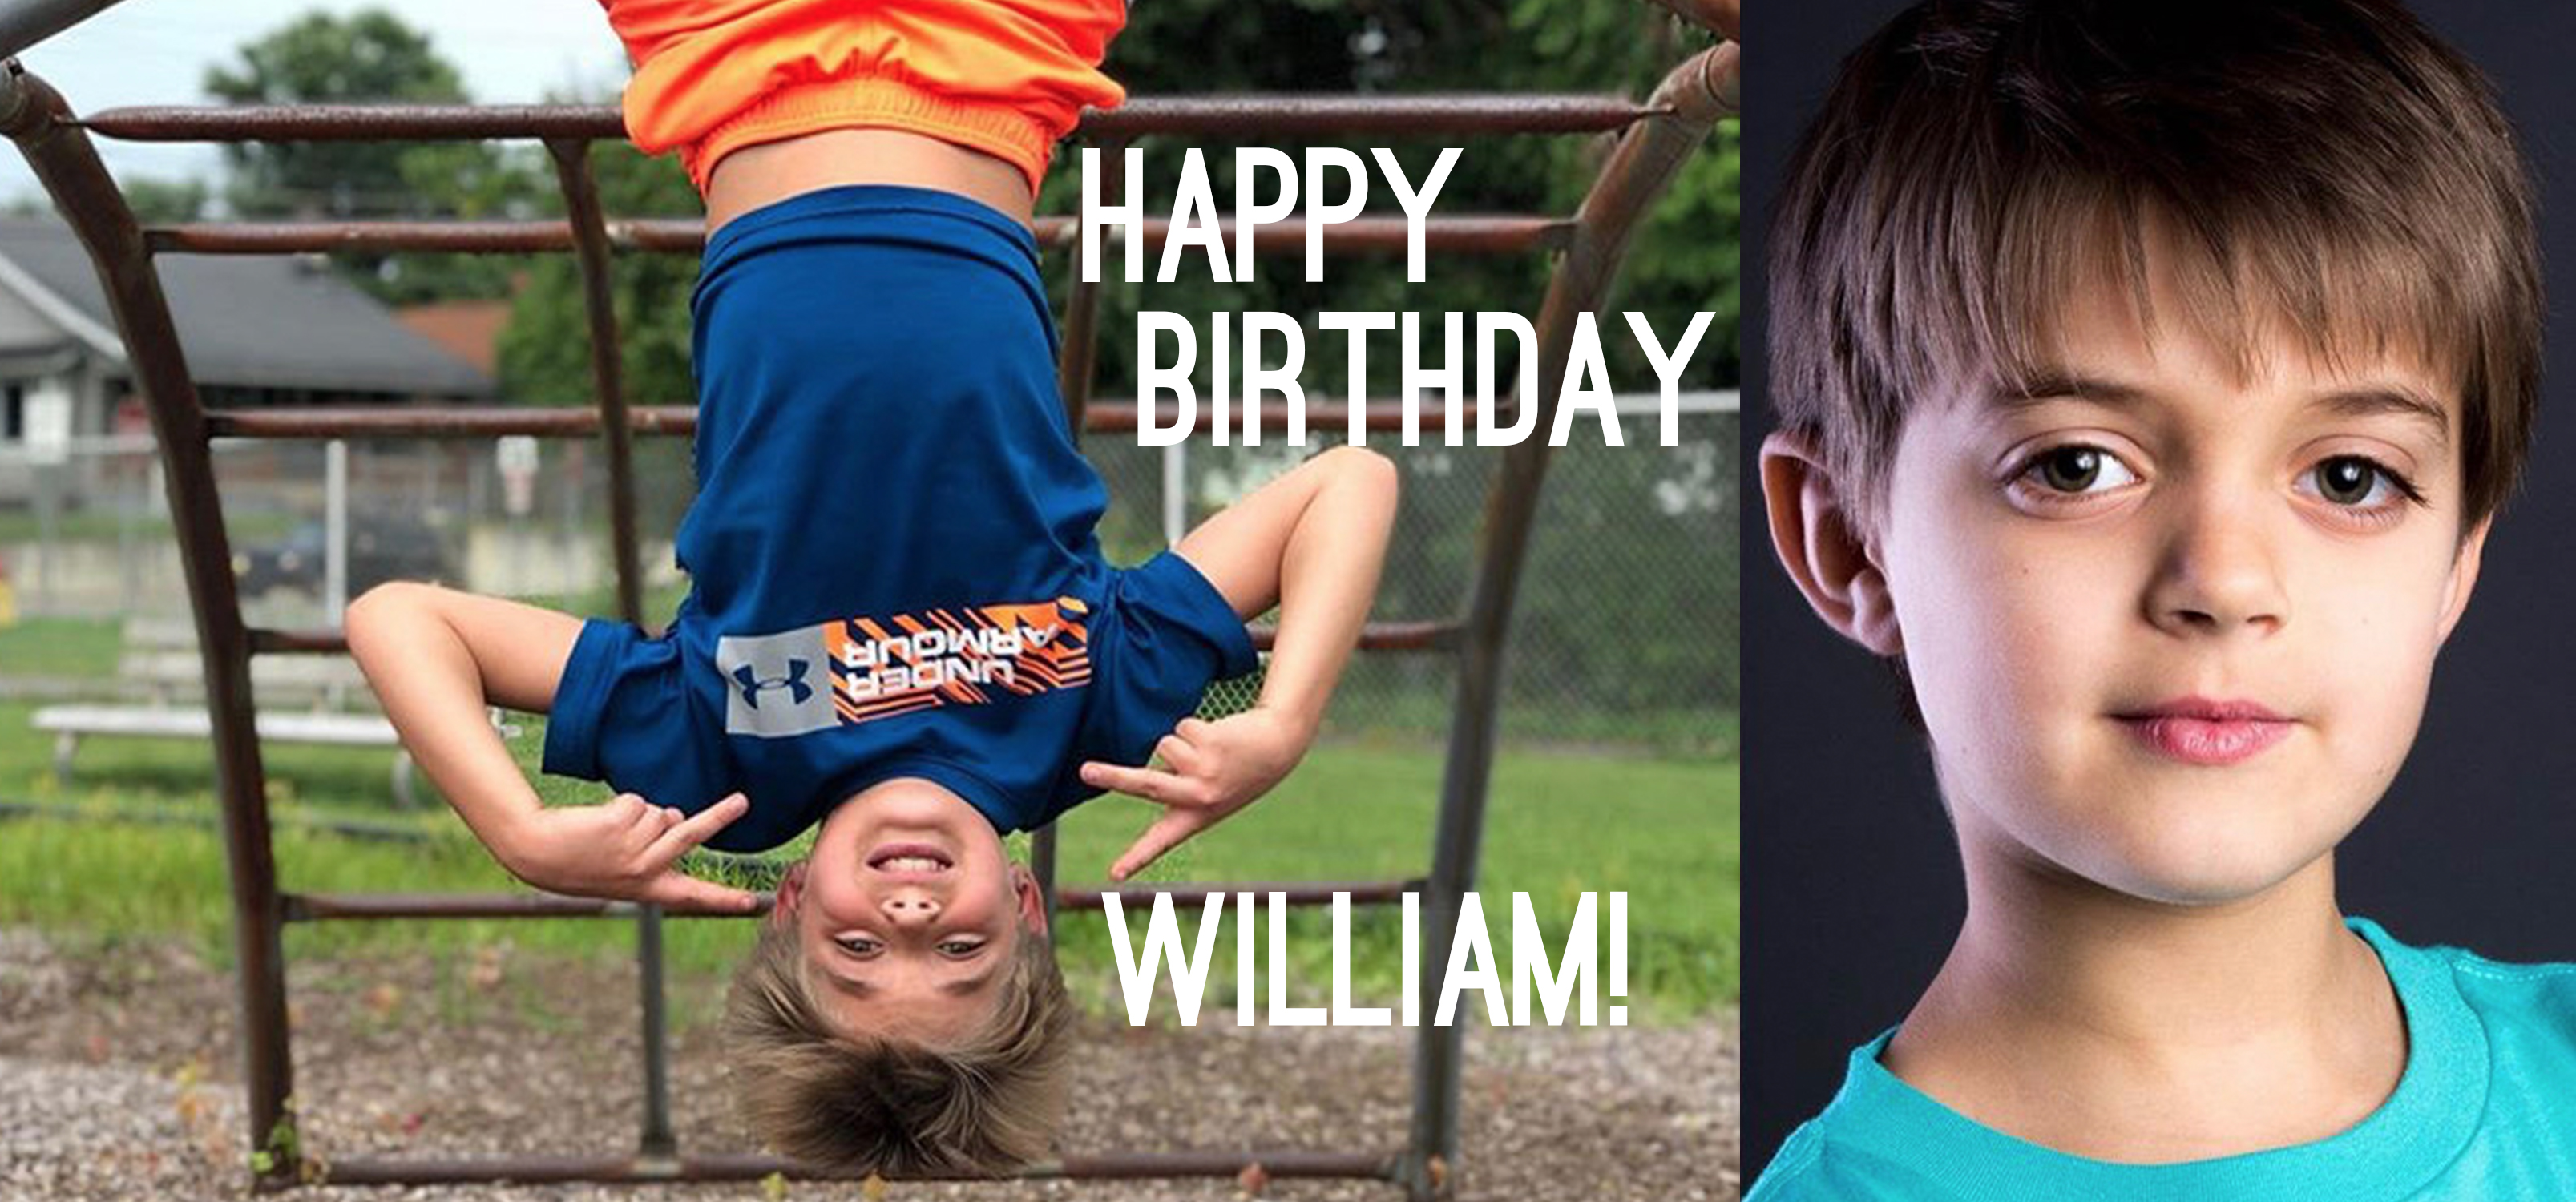 Happy Belated Birthday to William Thomas Colin, Tour Alumni to Appear in “John Mulaney & The Sack Lunch Brunch,” and more!